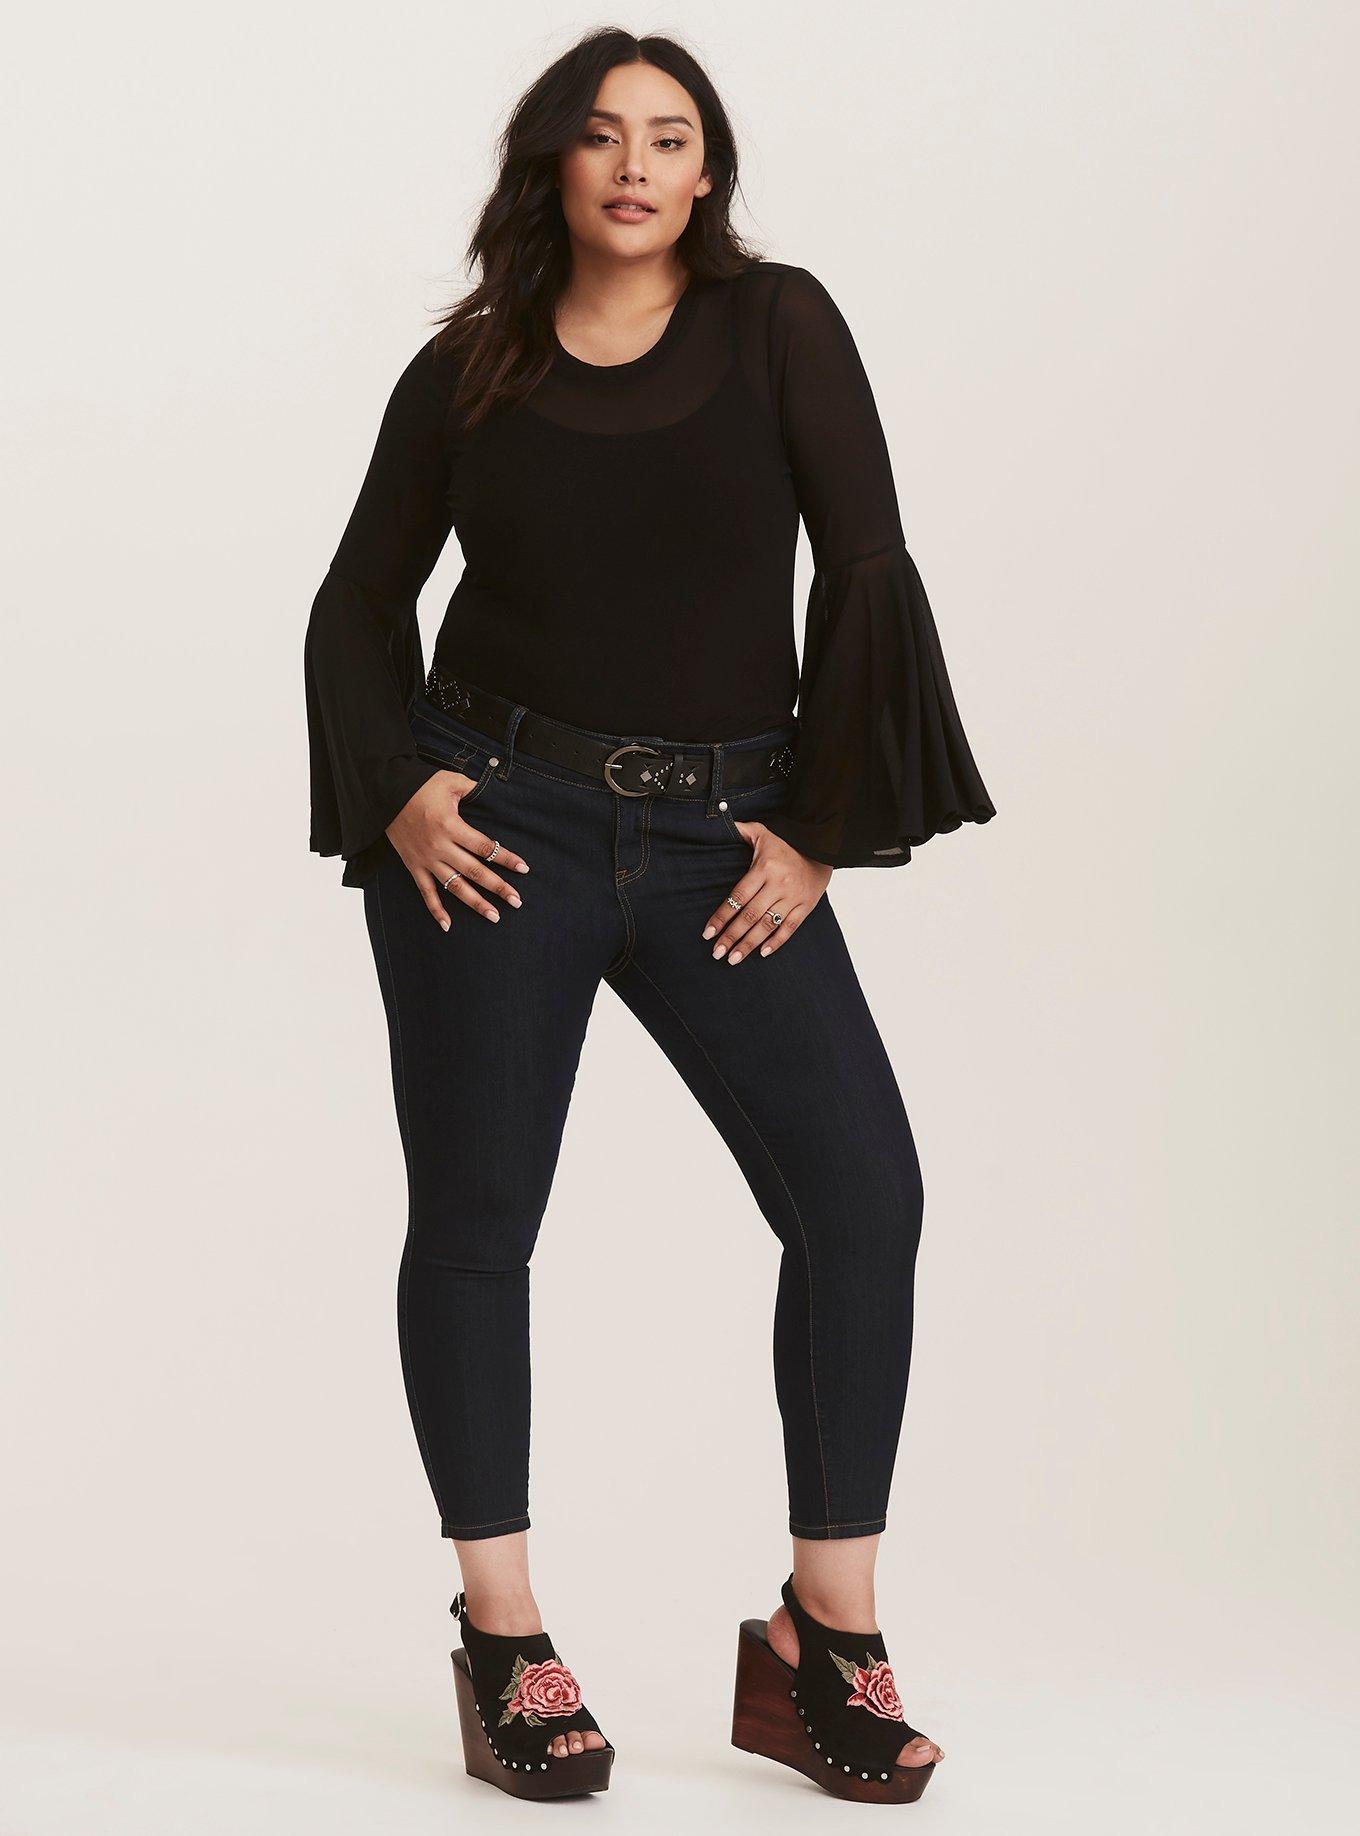 Plus Size Black Mesh Sleeve Faux Leather Top in 2023